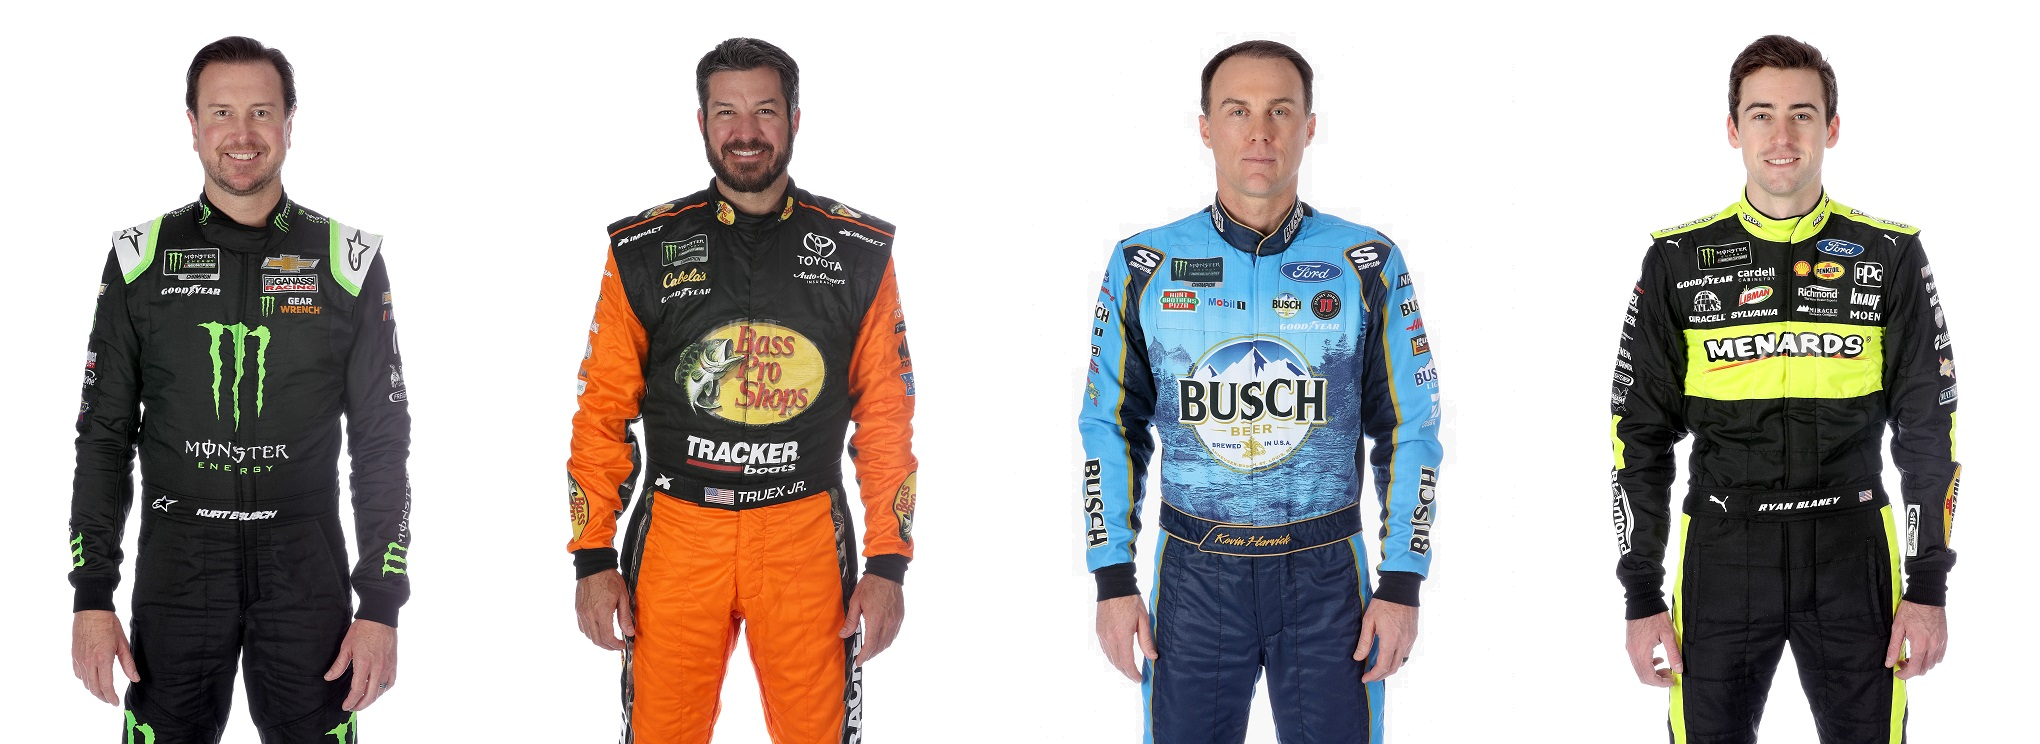 Given these points, any of these four make for a great AAA Texas 500 race pick.